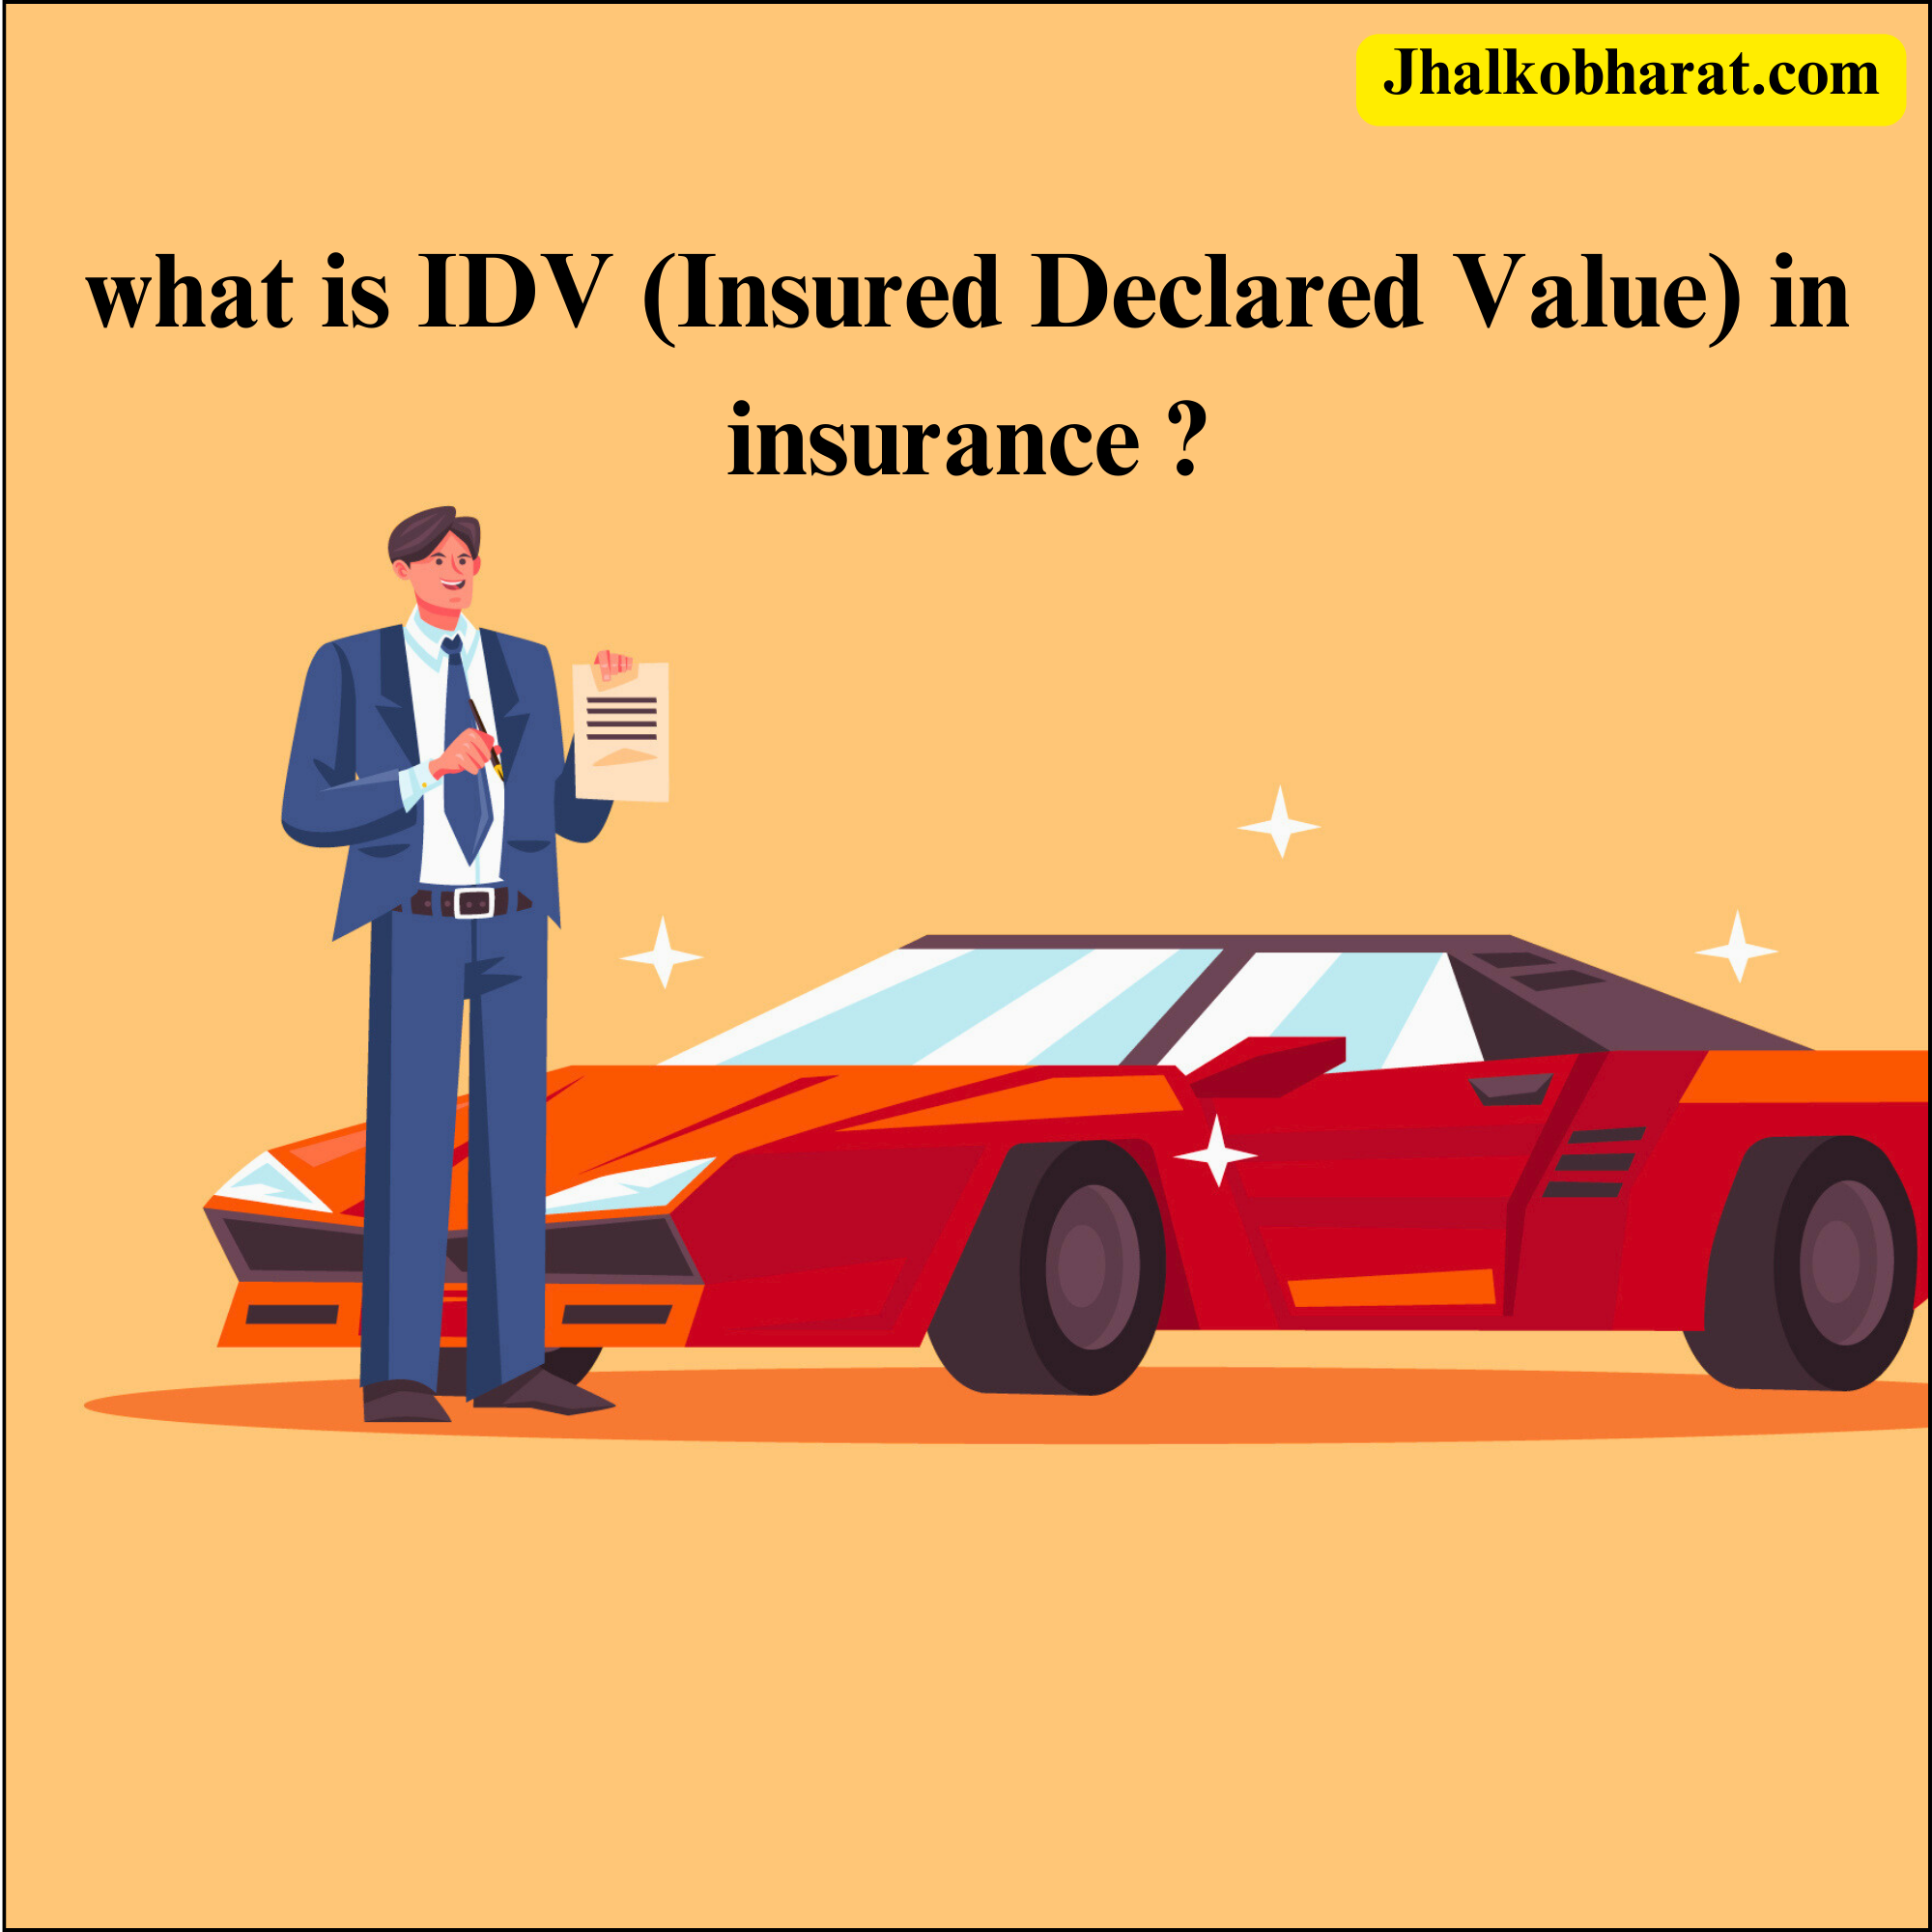 IDV: The Ultimate Guide Insured Declared Value